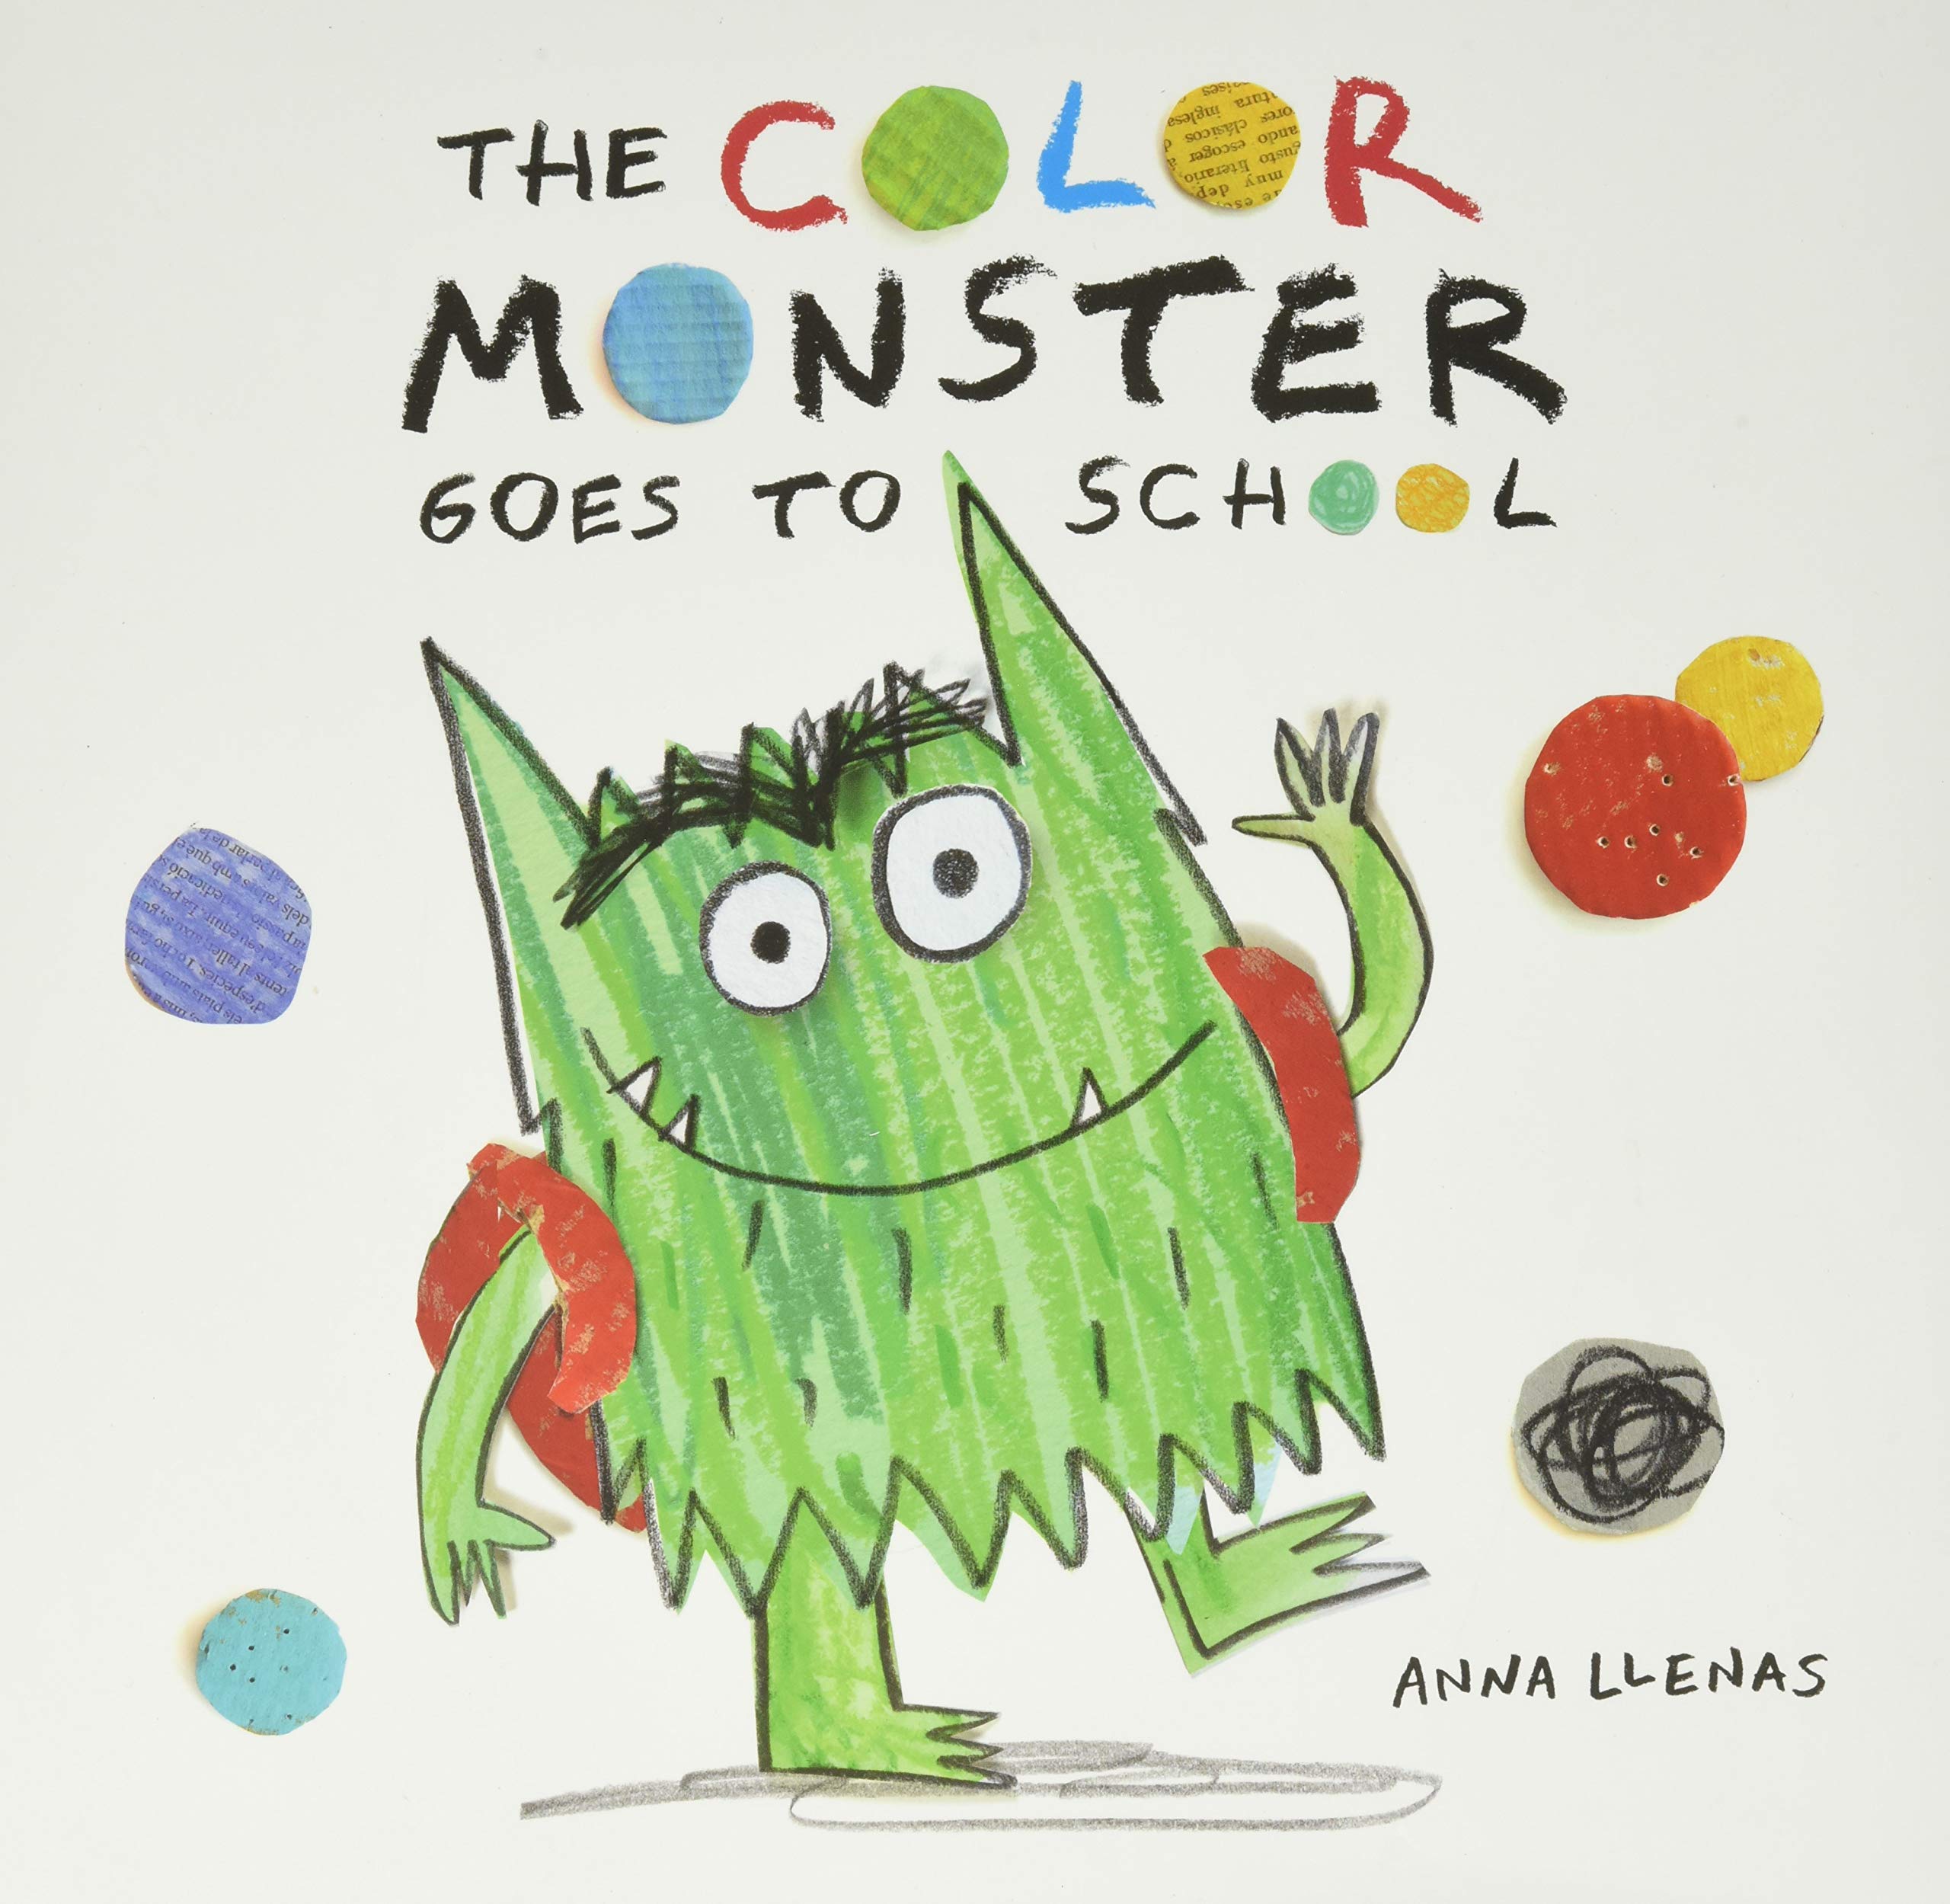 speech and language teaching concepts for The Color Monster Goes to School in speech therapy​ ​